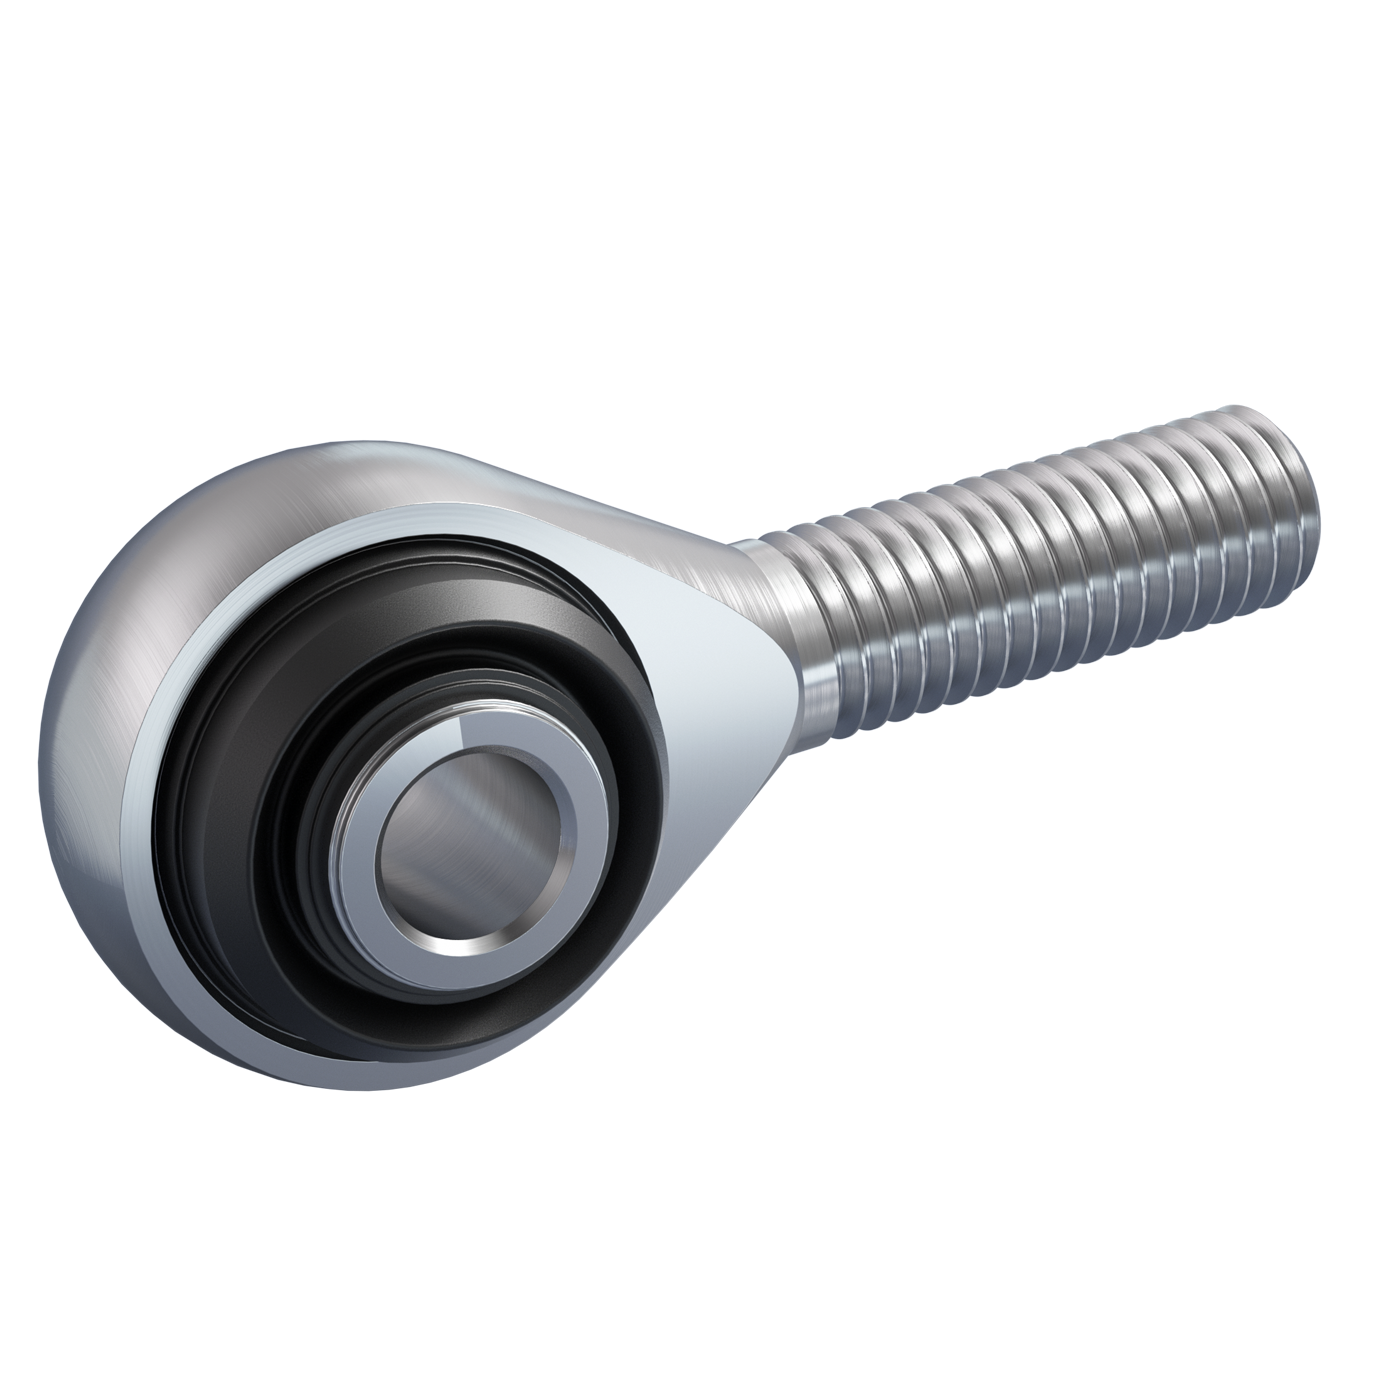 Rod ends DIN ISO 12240-4 (DIN 648) K series maintenance-free version stainless steel with sealing male thread